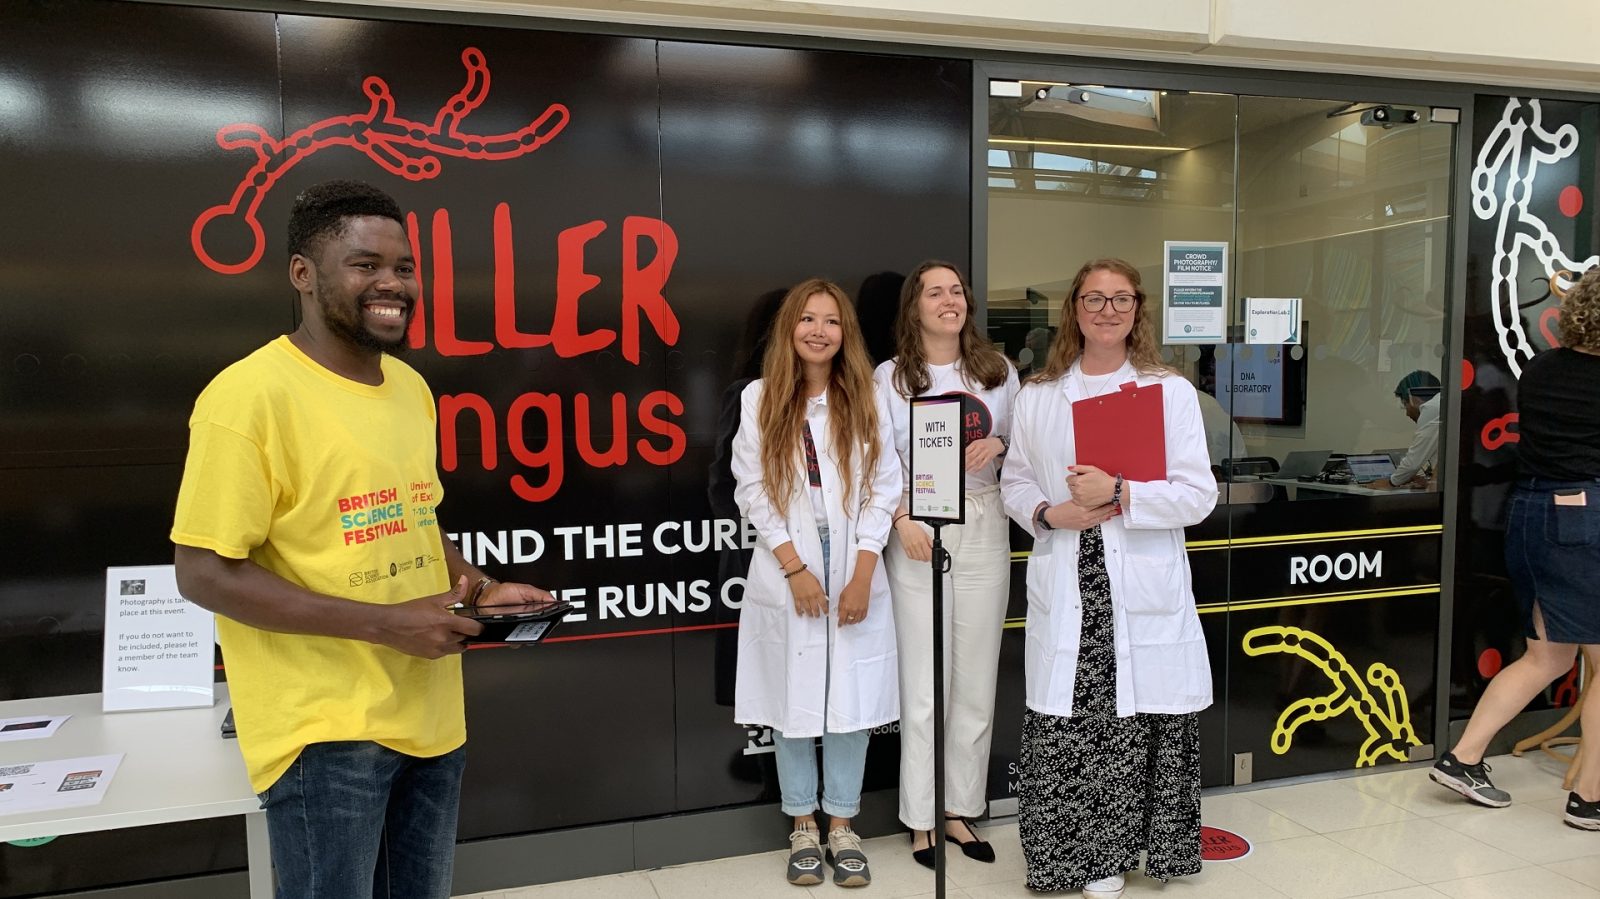 People dressed as scientists welcoming visitors to the interactive Killer Fungus activity at The Bristish Science Festival hosted by the University of Exeter in 2023